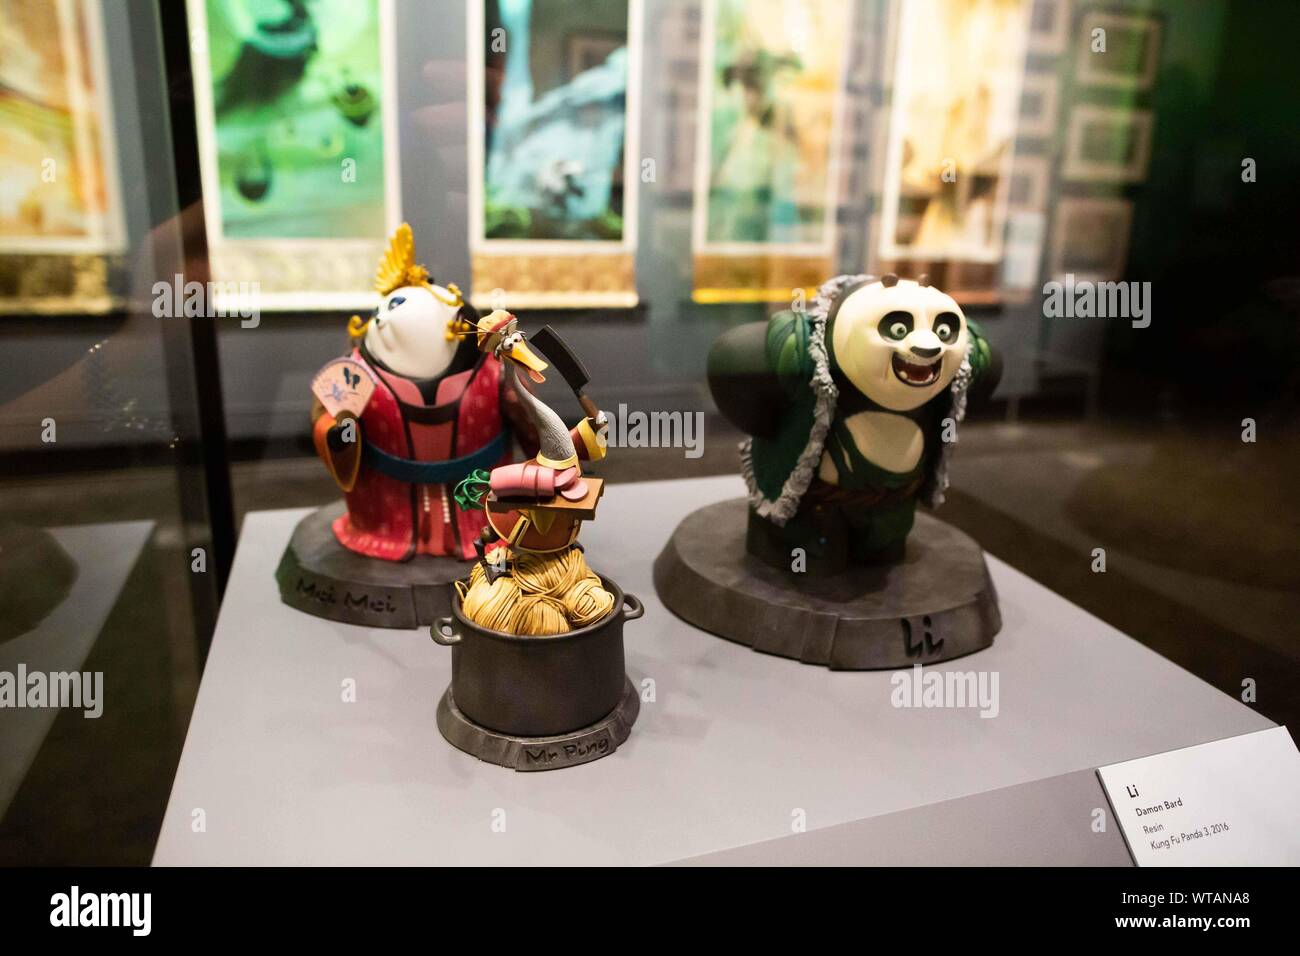 190911) -- CANBERRA, Sept. 11, 2019 (Xinhua) -- Photo taken on Sept. 11,  2019 shows 3D models made and used for the DreamWorks movies at an  exhibition on DreamWorks Animation in the